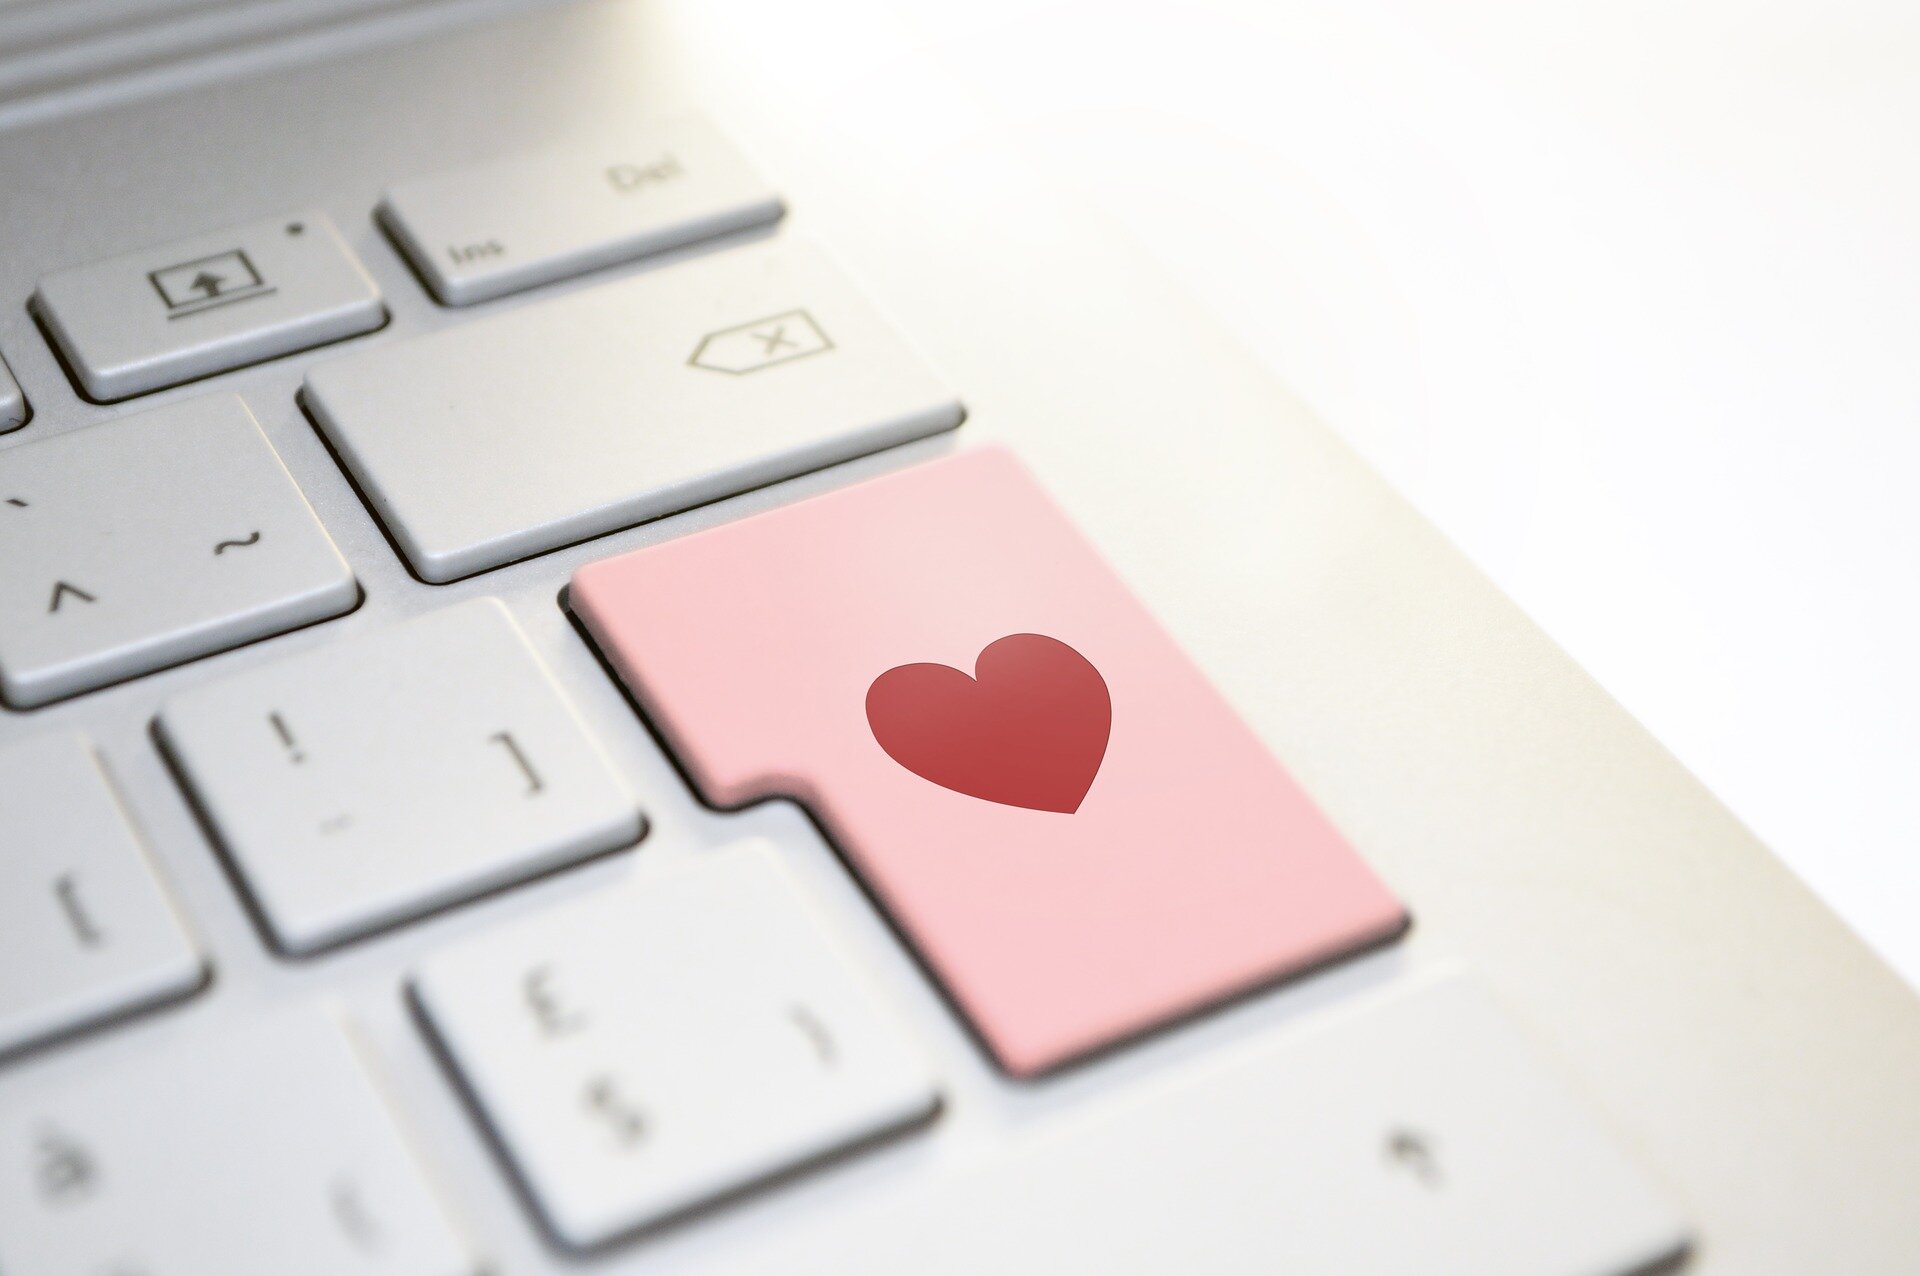 The level of satisfaction with online dating apps varies based on individual preferences